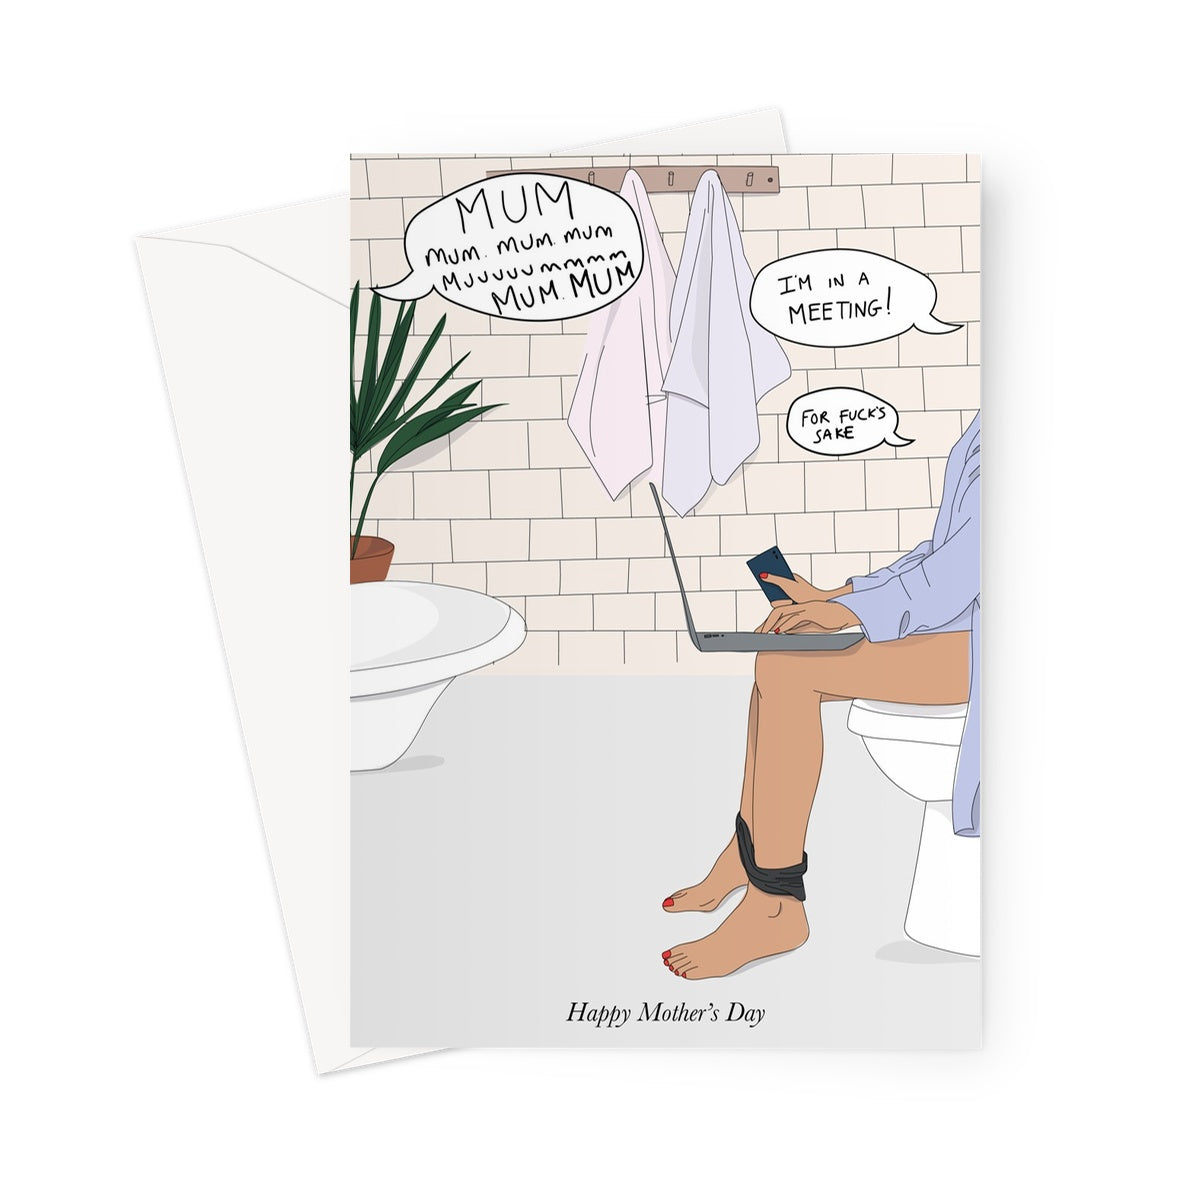 mother's day meeting Greeting Card